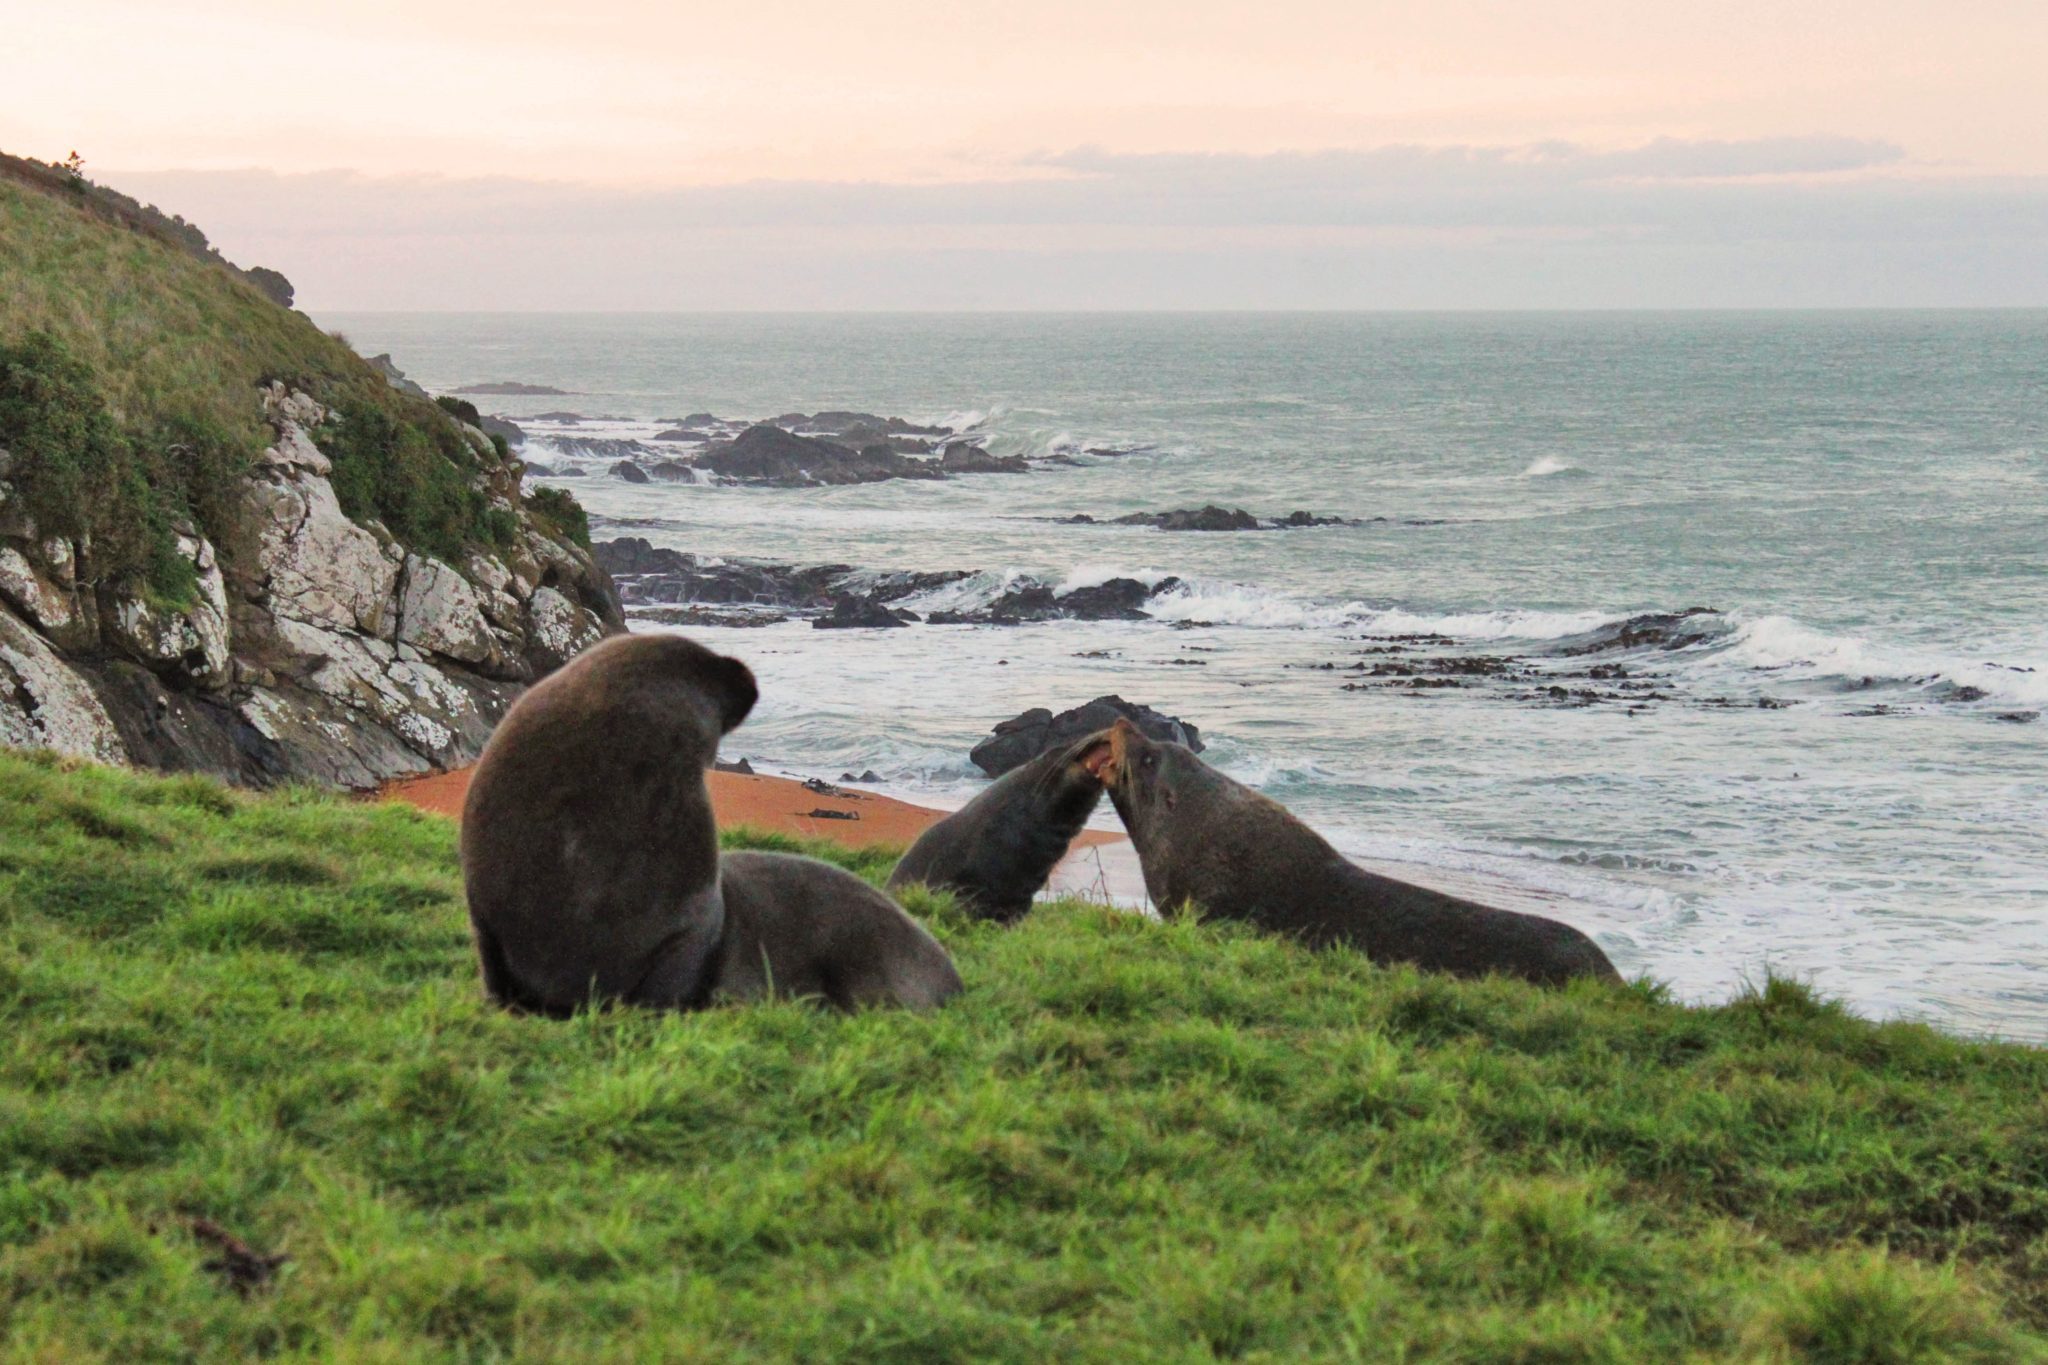 Katiki Point Lighthouse is one of the best places to see penguins and wildlife on the South Island-  Visit these 17 underrated spots on New Zealand's South Island #newzealand #southisland #katikipointlighthouse